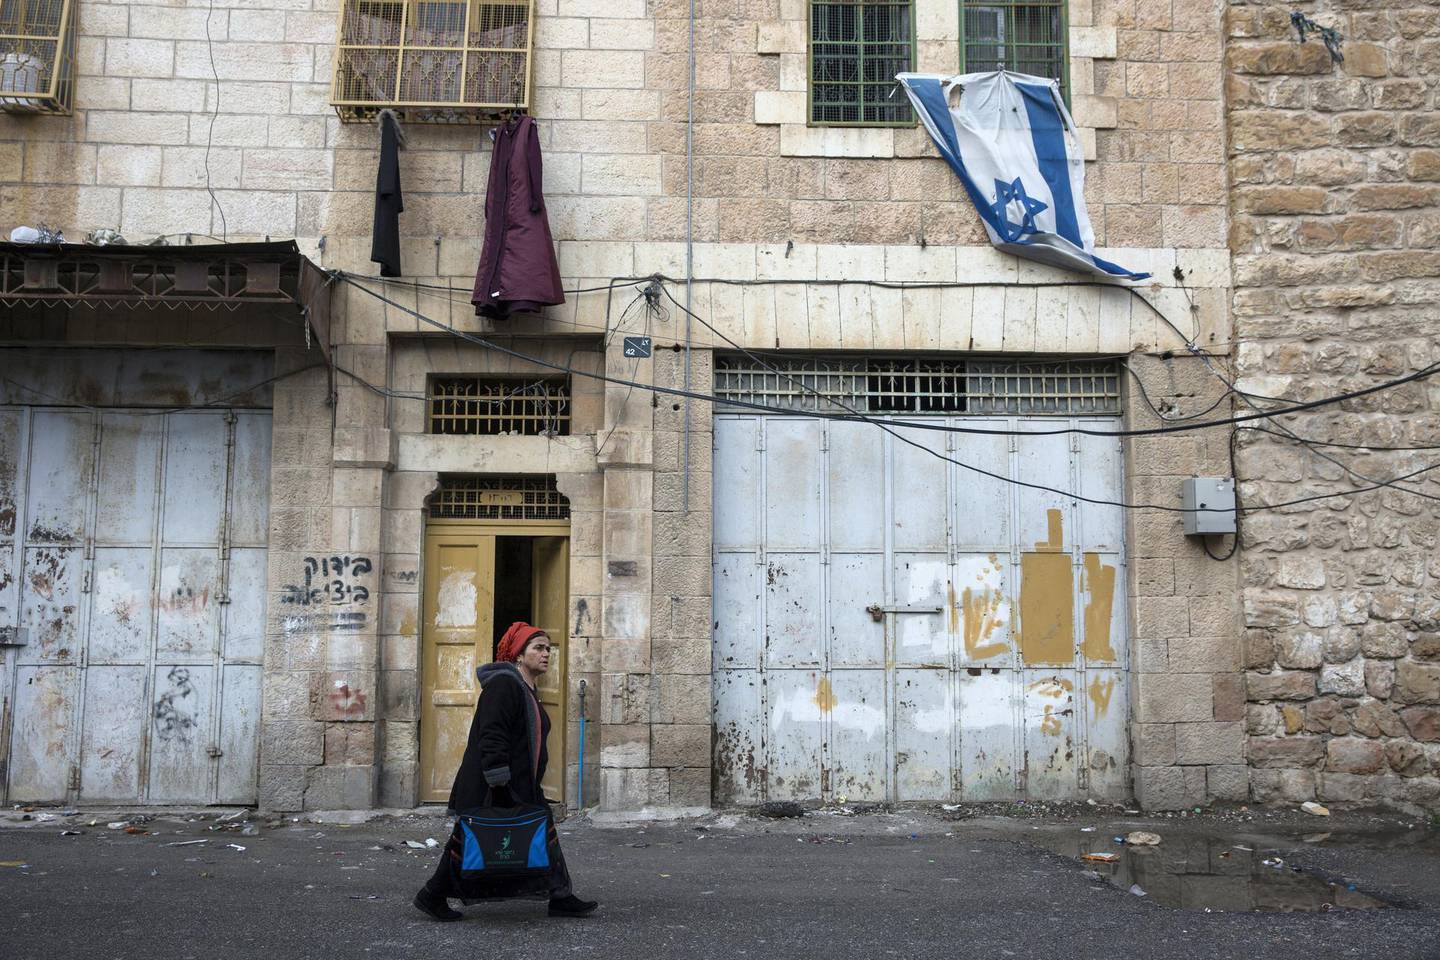 A Jewish settler walks past a street of closed Palestinian shopsin the divided area of the West Bank city of Hebron where about 900 Jewish Settlers now live on September 27,2018. The area is often to referred to as a ghost town as the presence of the settlers has restrained the freedom of movement of the thousands of Palestinians that live in the area .(Photo by Heidi Levine for The National).